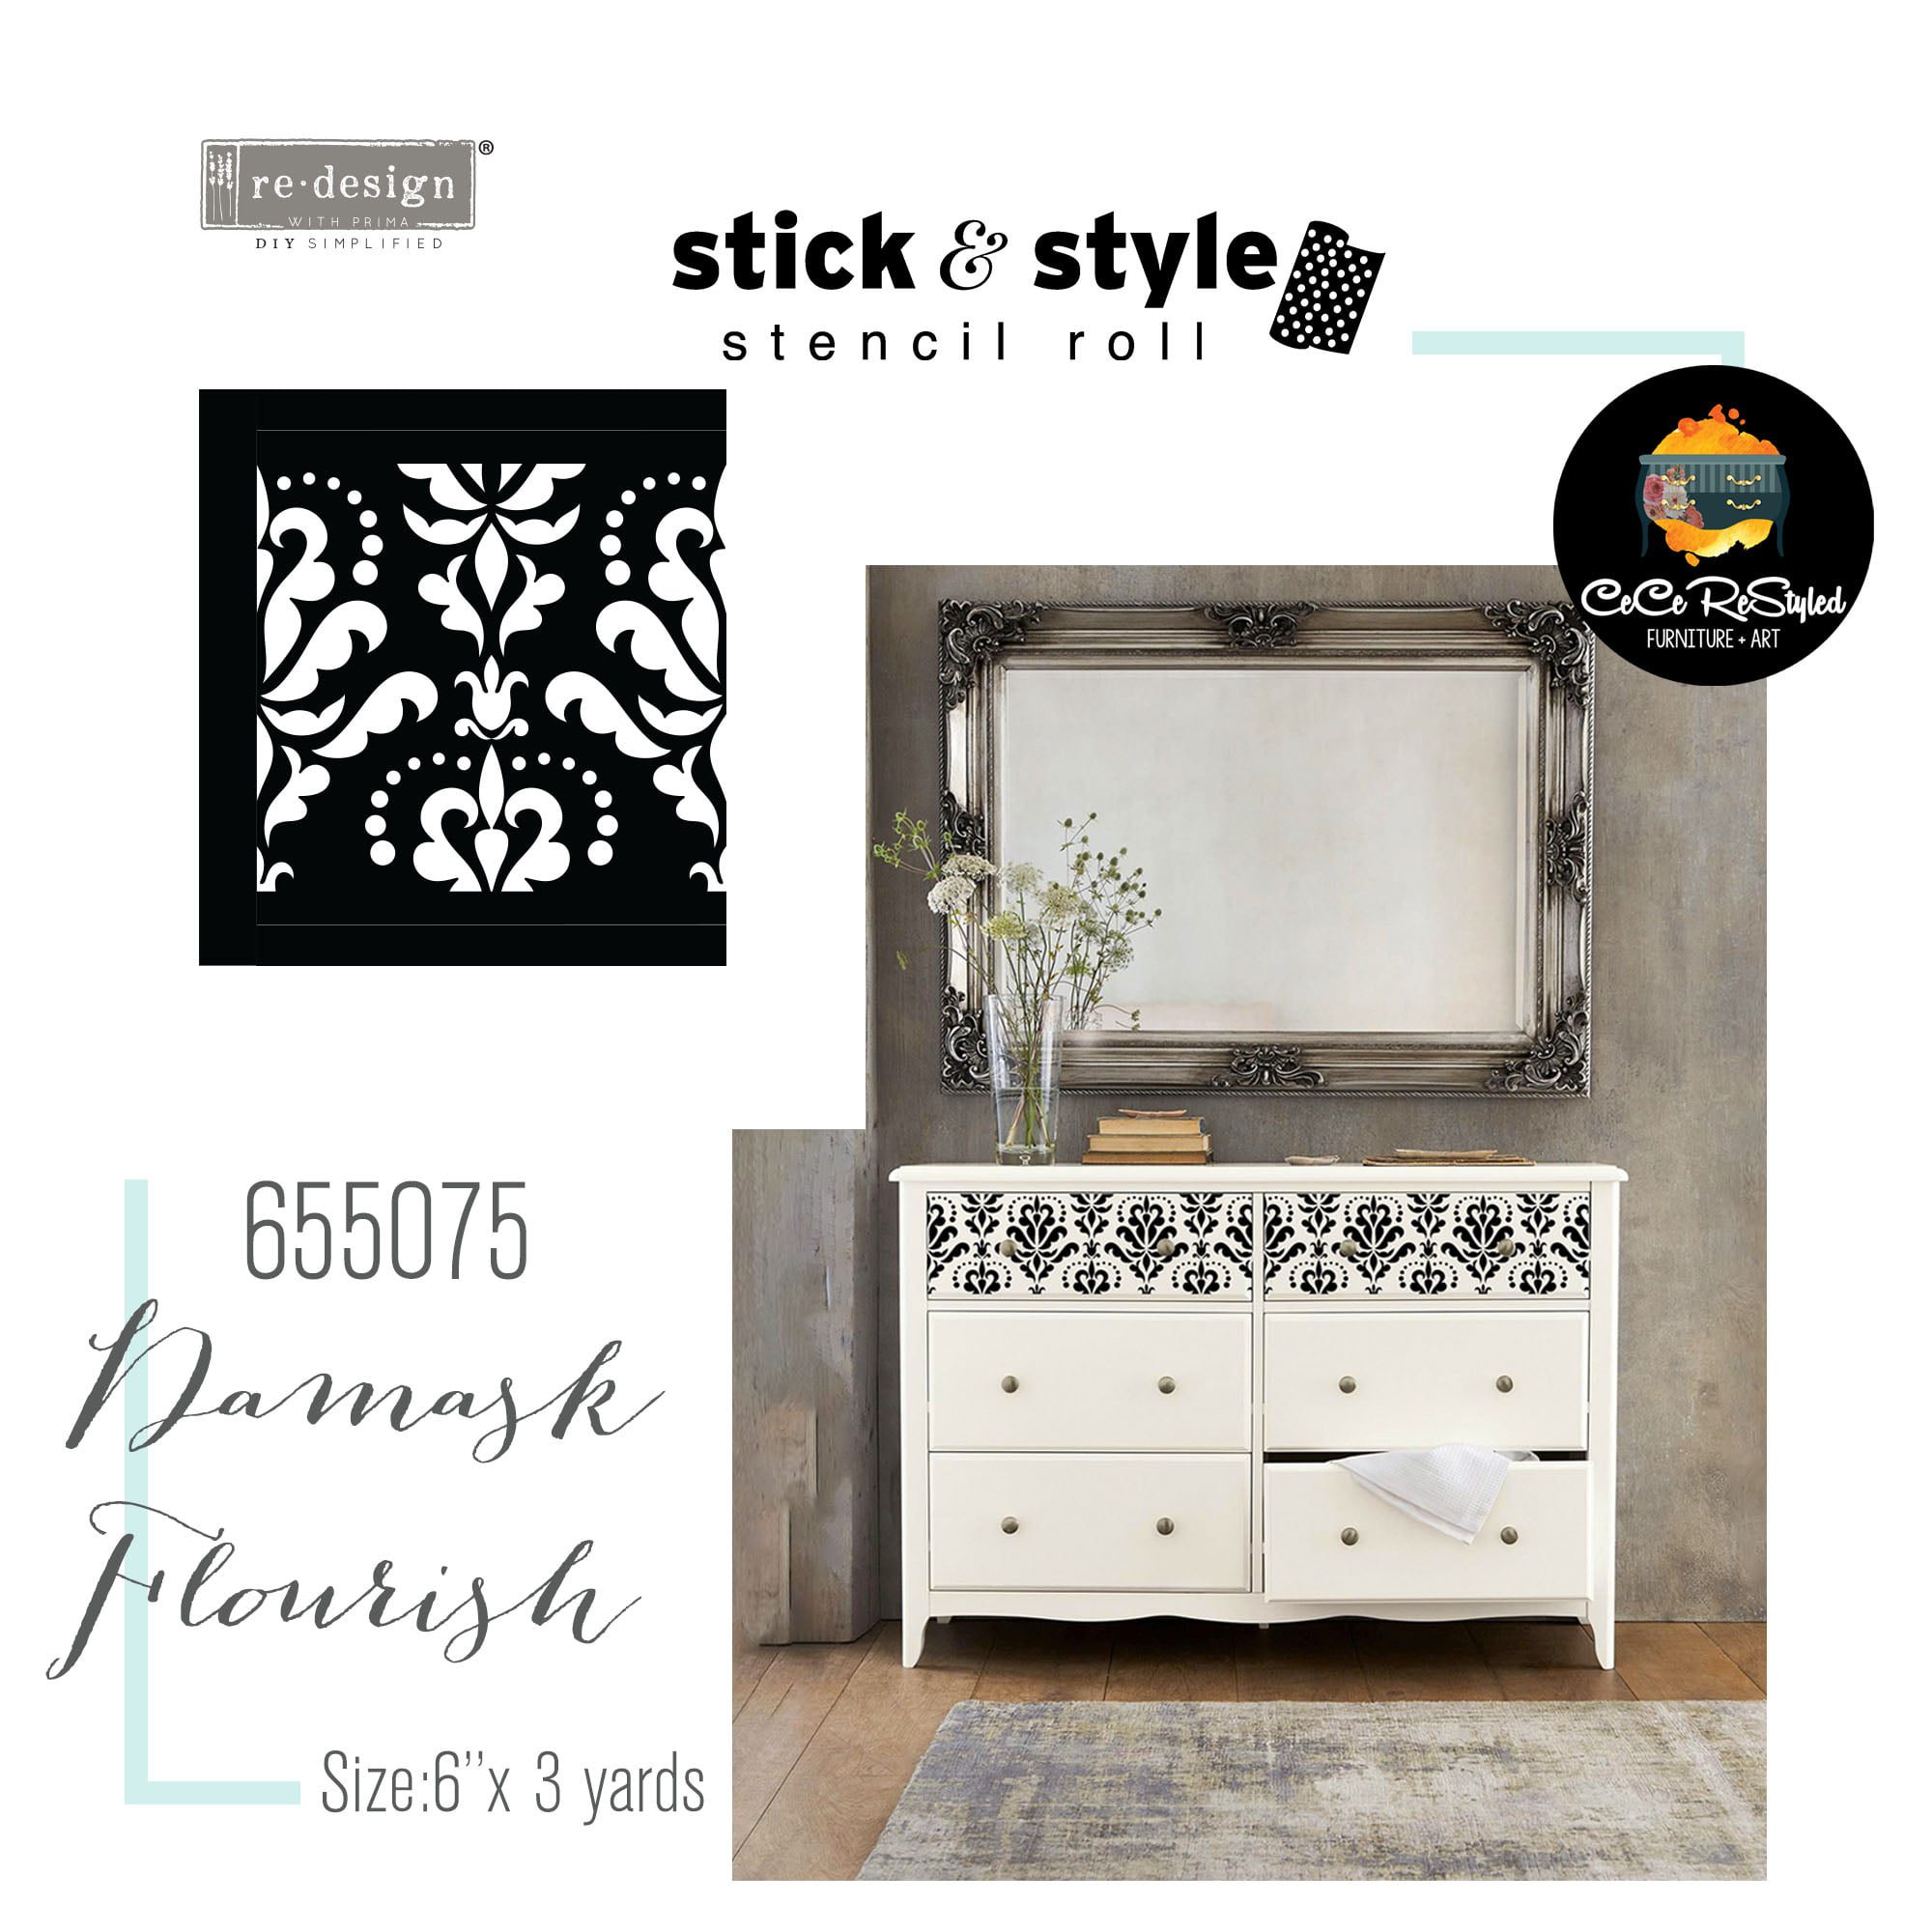 Classic Lace Stick & Style Reusable Adhesive Stencil from Redesign with Prima with Free Shipping